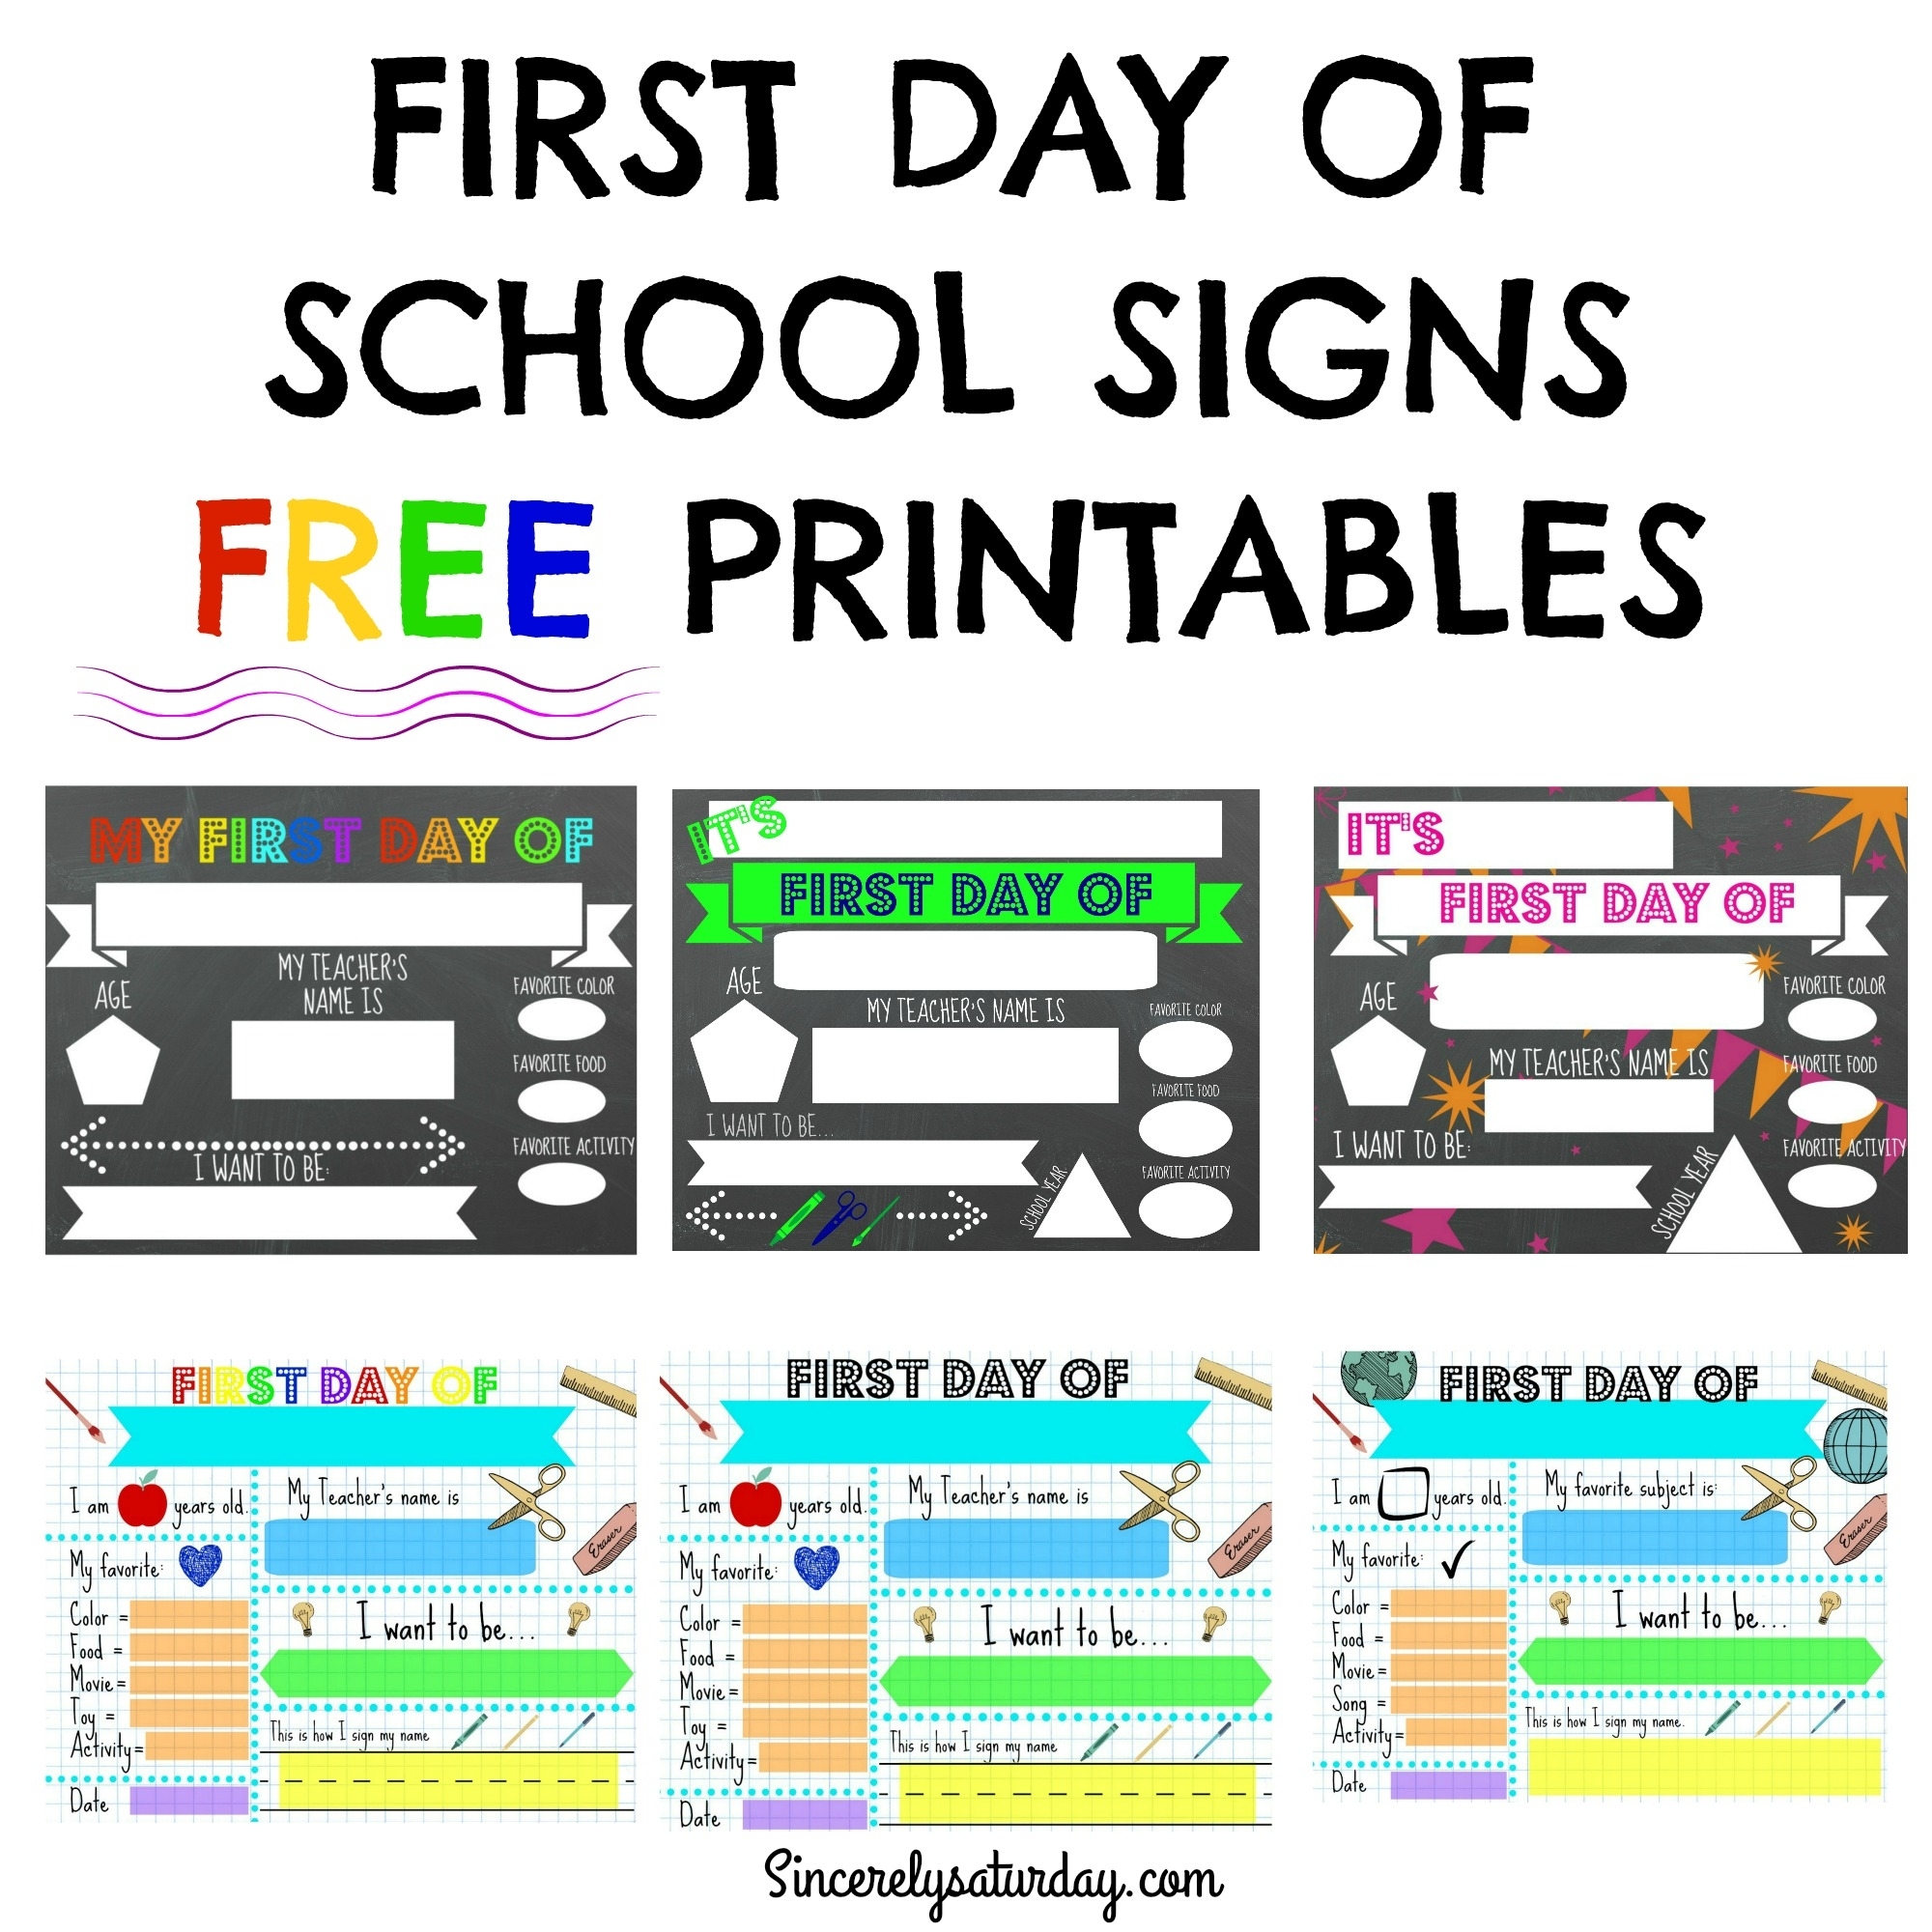 FREE PRINTABLE FIRST DAY OF SCHOOL SIGNS